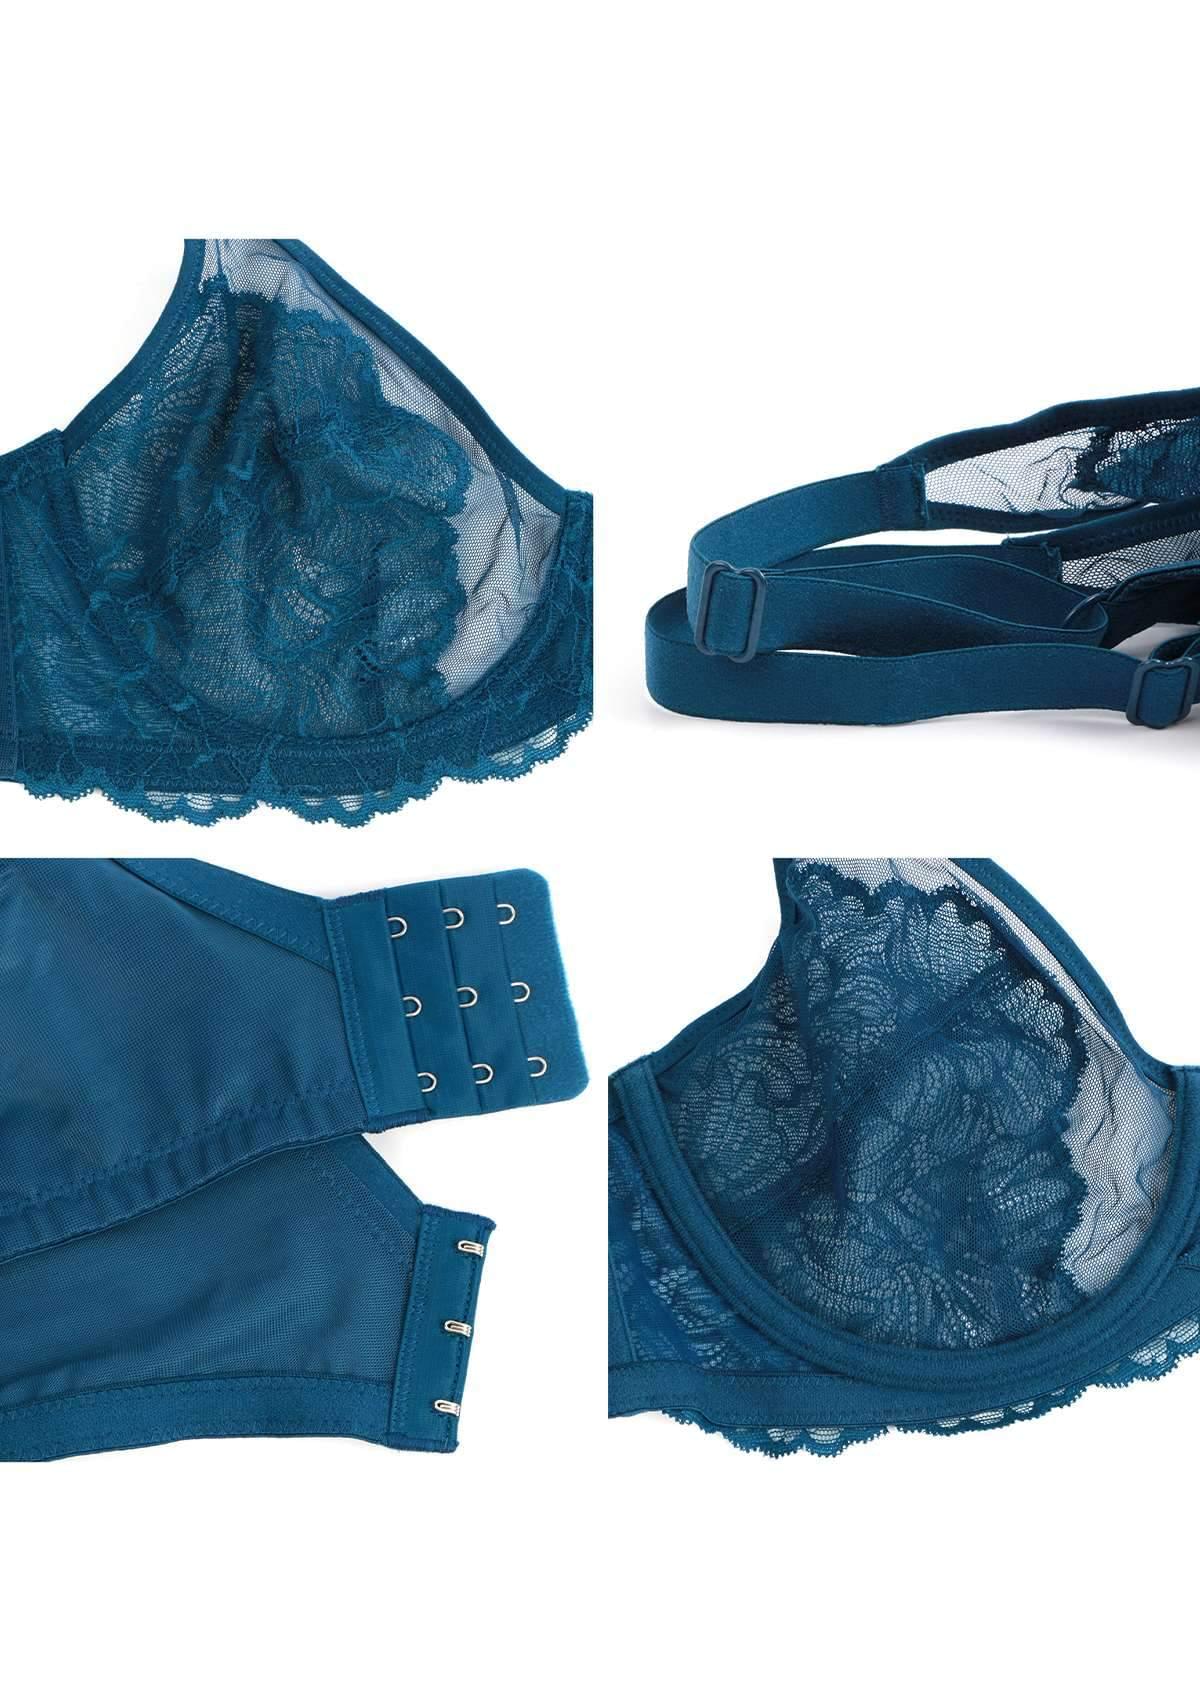 HSIA Blossom Lace Bra And Underwear Sets: Comfortable Plus Size Bra - Biscay Blue / 34 / C